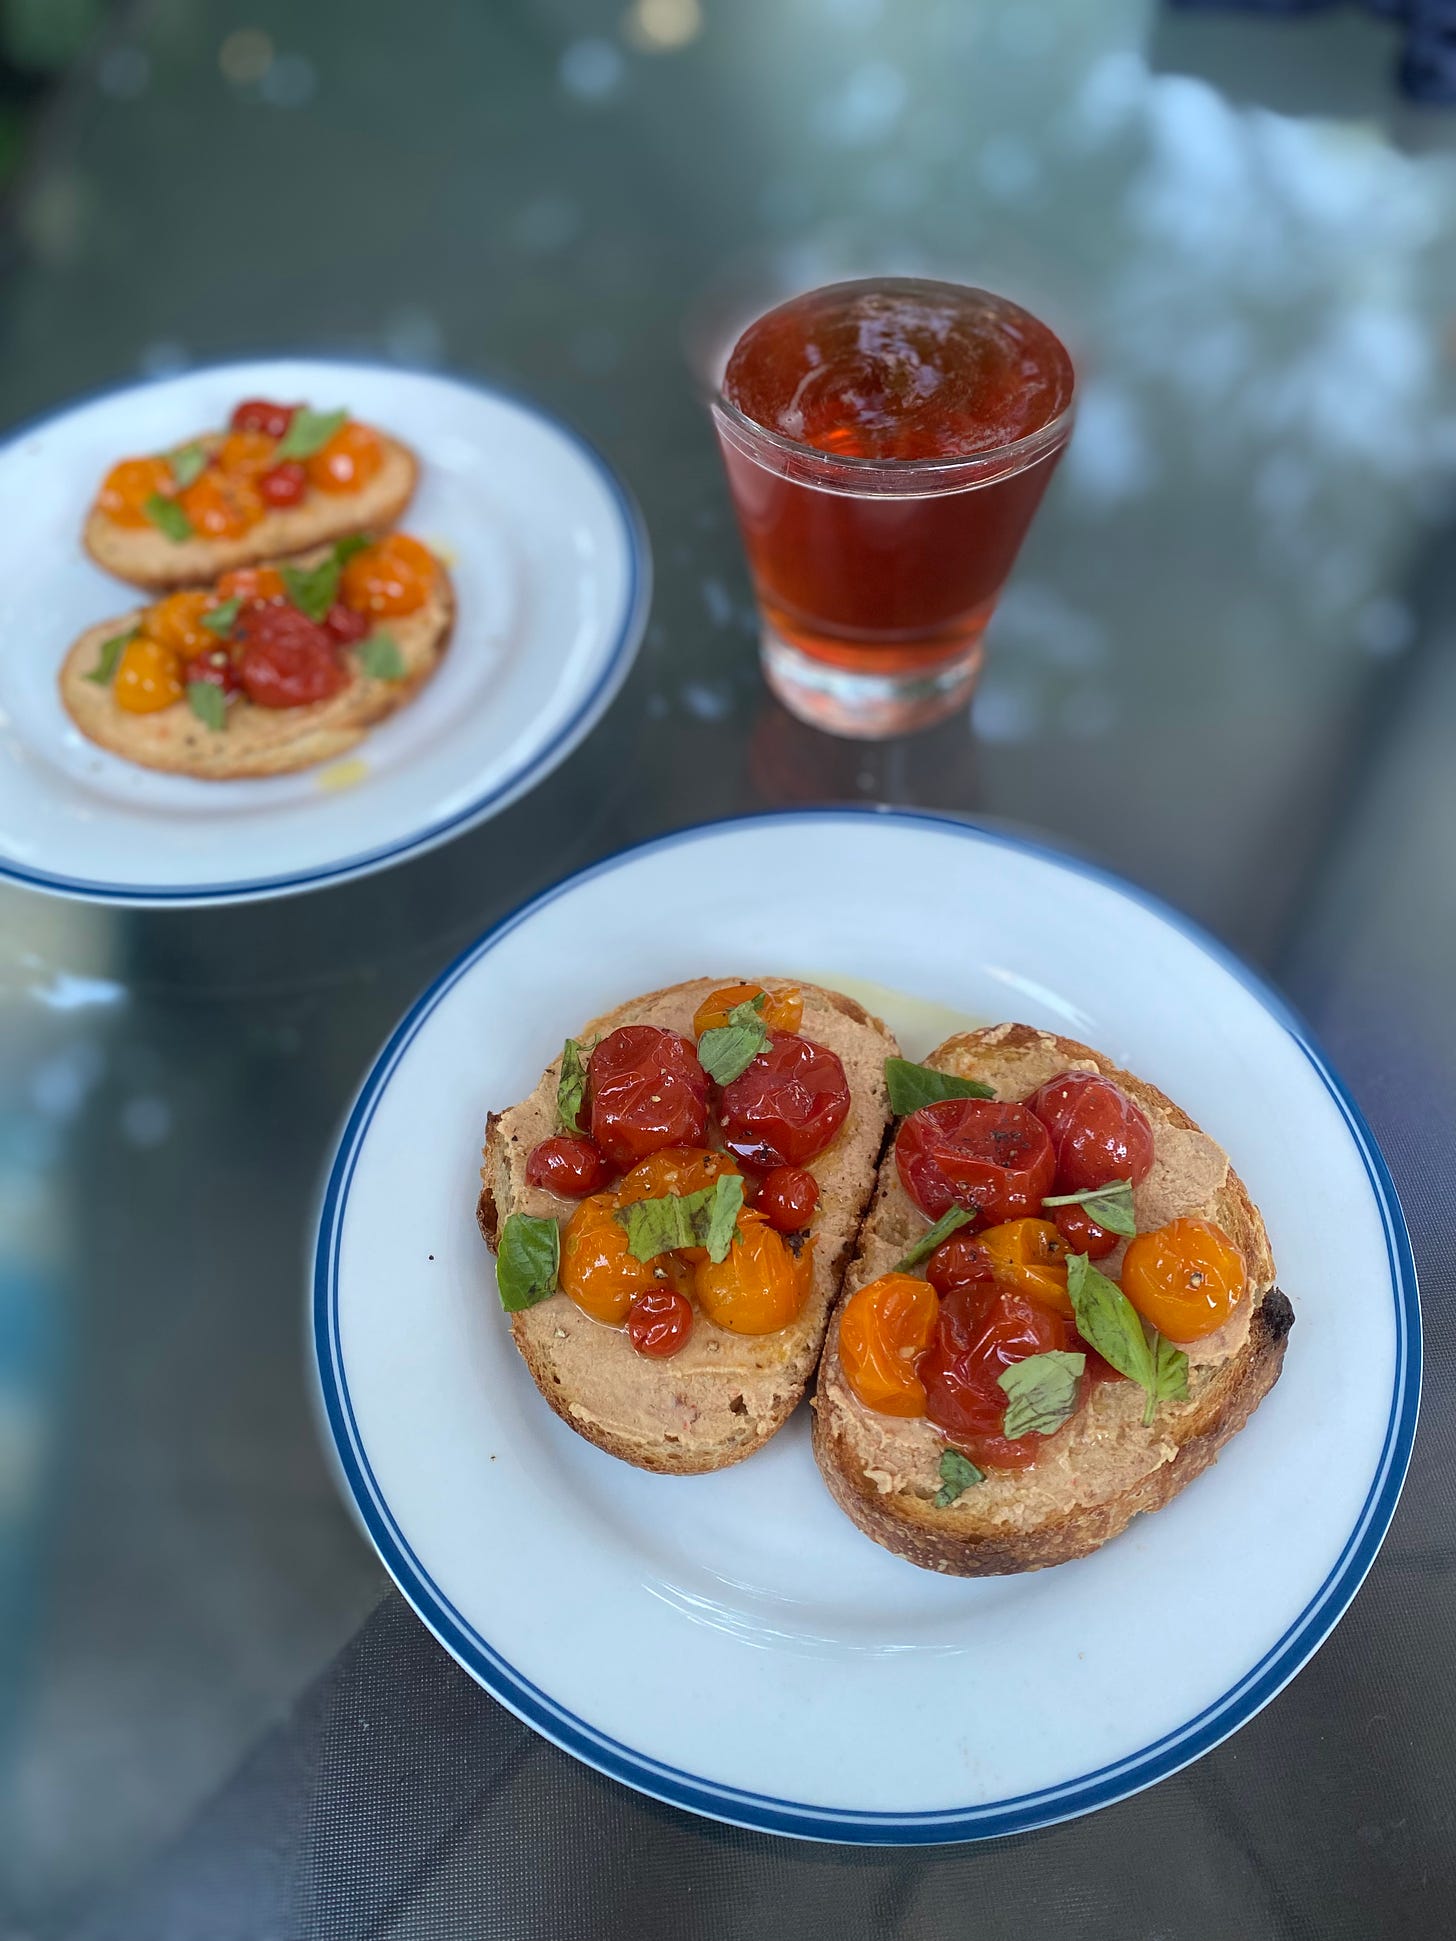 two white plates with blue rims, each with two small slices of sourdough. each piece of toast has salmon pâté, orange and red cherry tomato confit, and torn pieces of basil on top. a glass of pinkish sour beer sits between them.